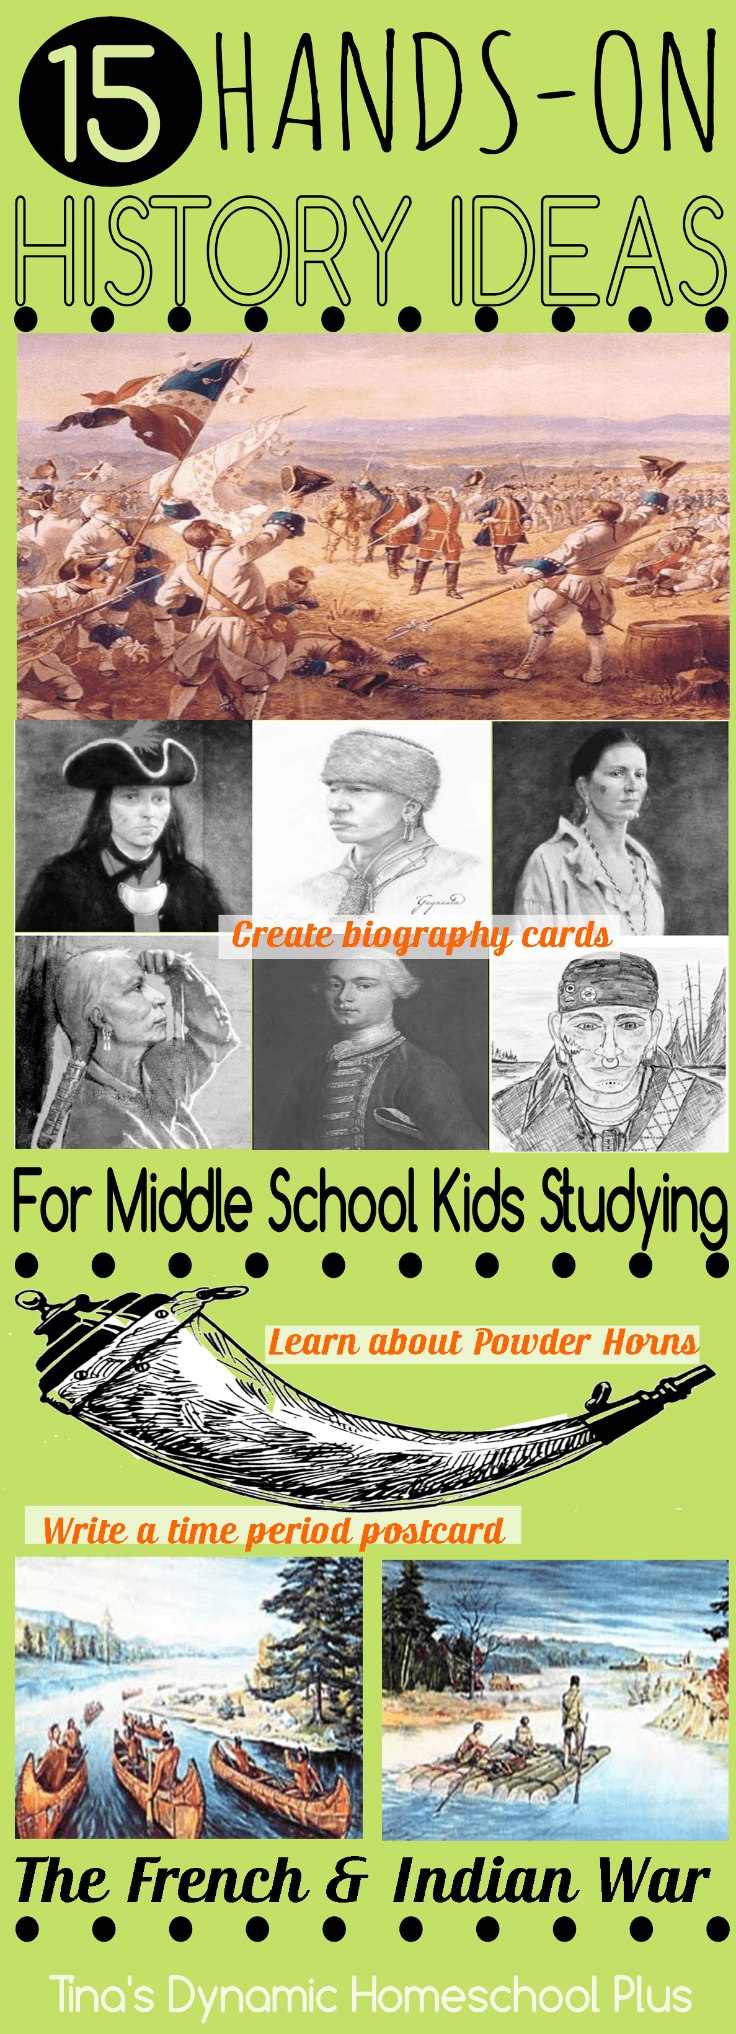 15 Hands-on History Ideas for Middle School Kids Studying The French and Indian War @ Tina's Dynamic Homeschool Plus